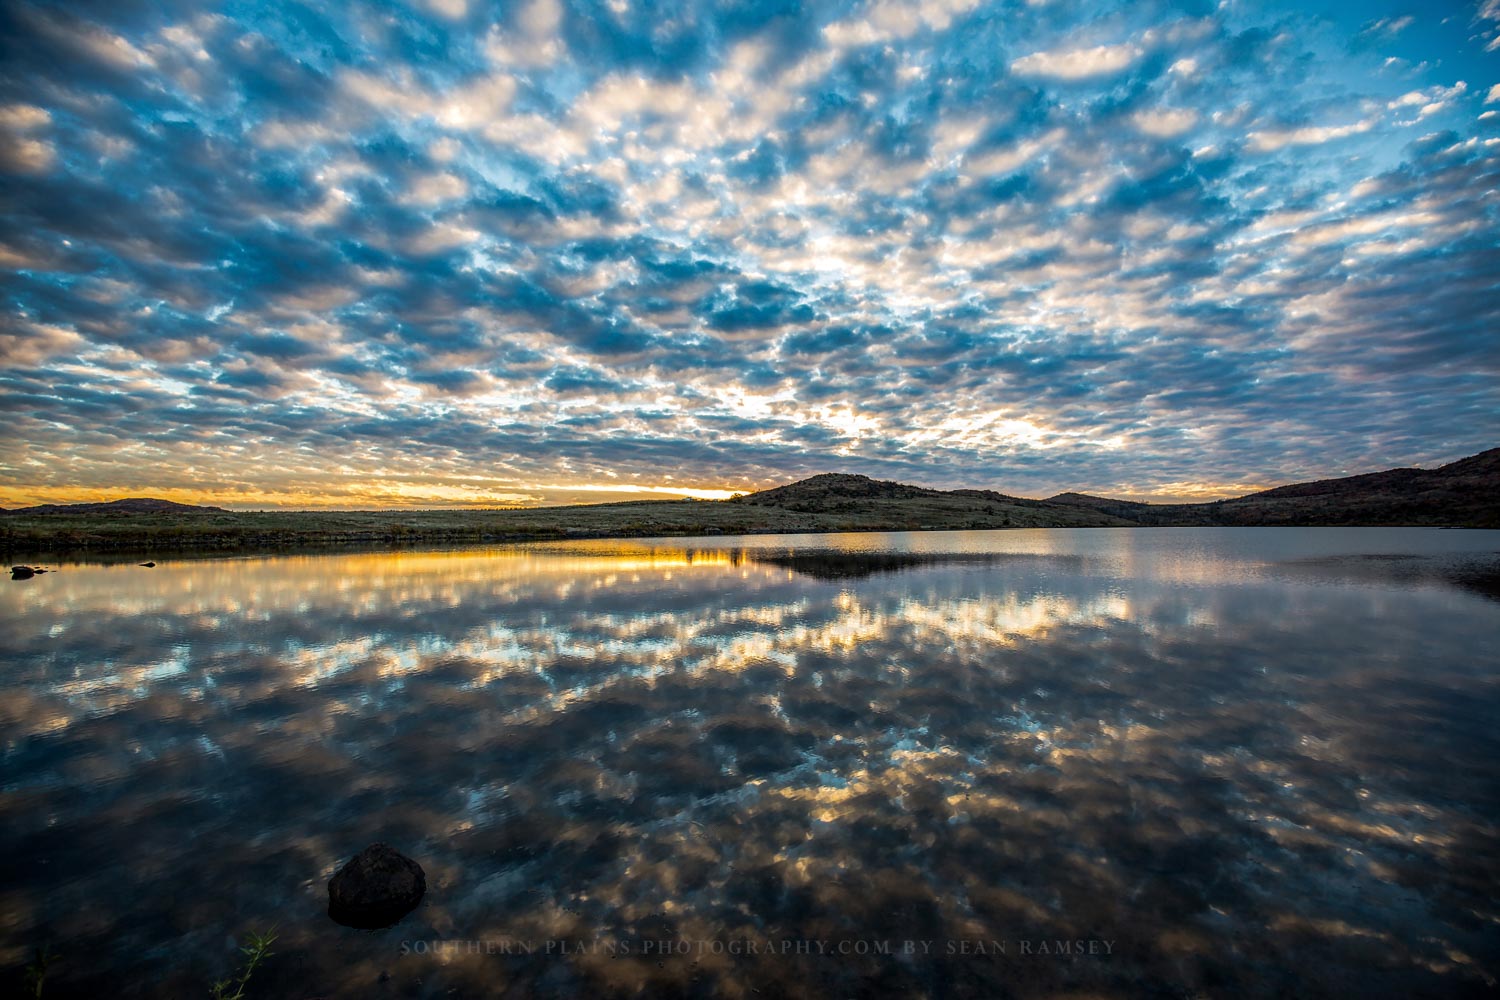 Landscape photography print of clouds reflecting off the waters of Lake Jed Johnson at sunset in the Wichita Mountains near Lawton, Oklahoma by Sean Ramsey of Southern Plains Photography.